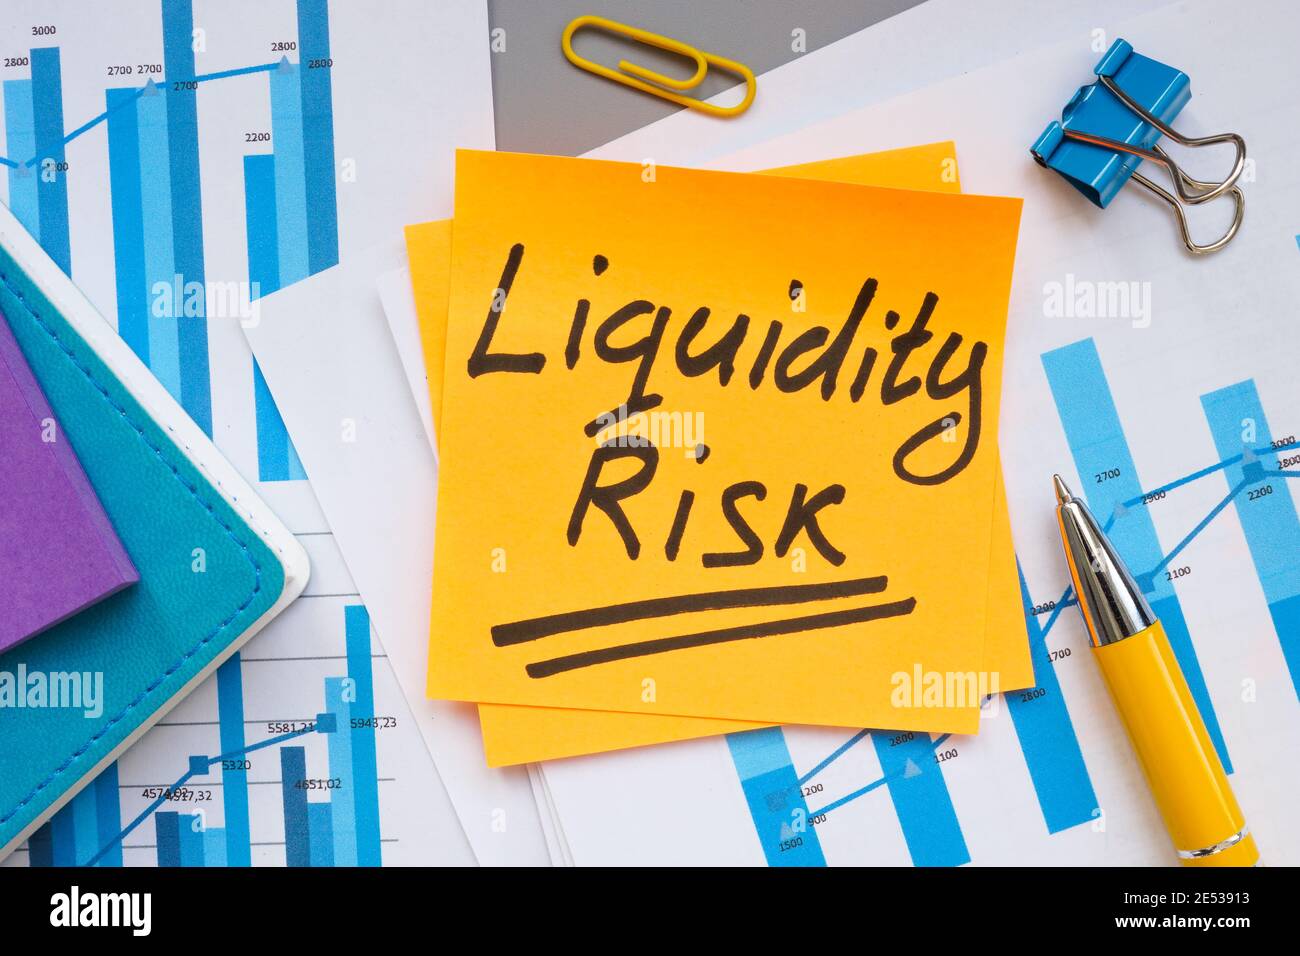 Liquidity risk phrase on the financial charts. Stock Photo